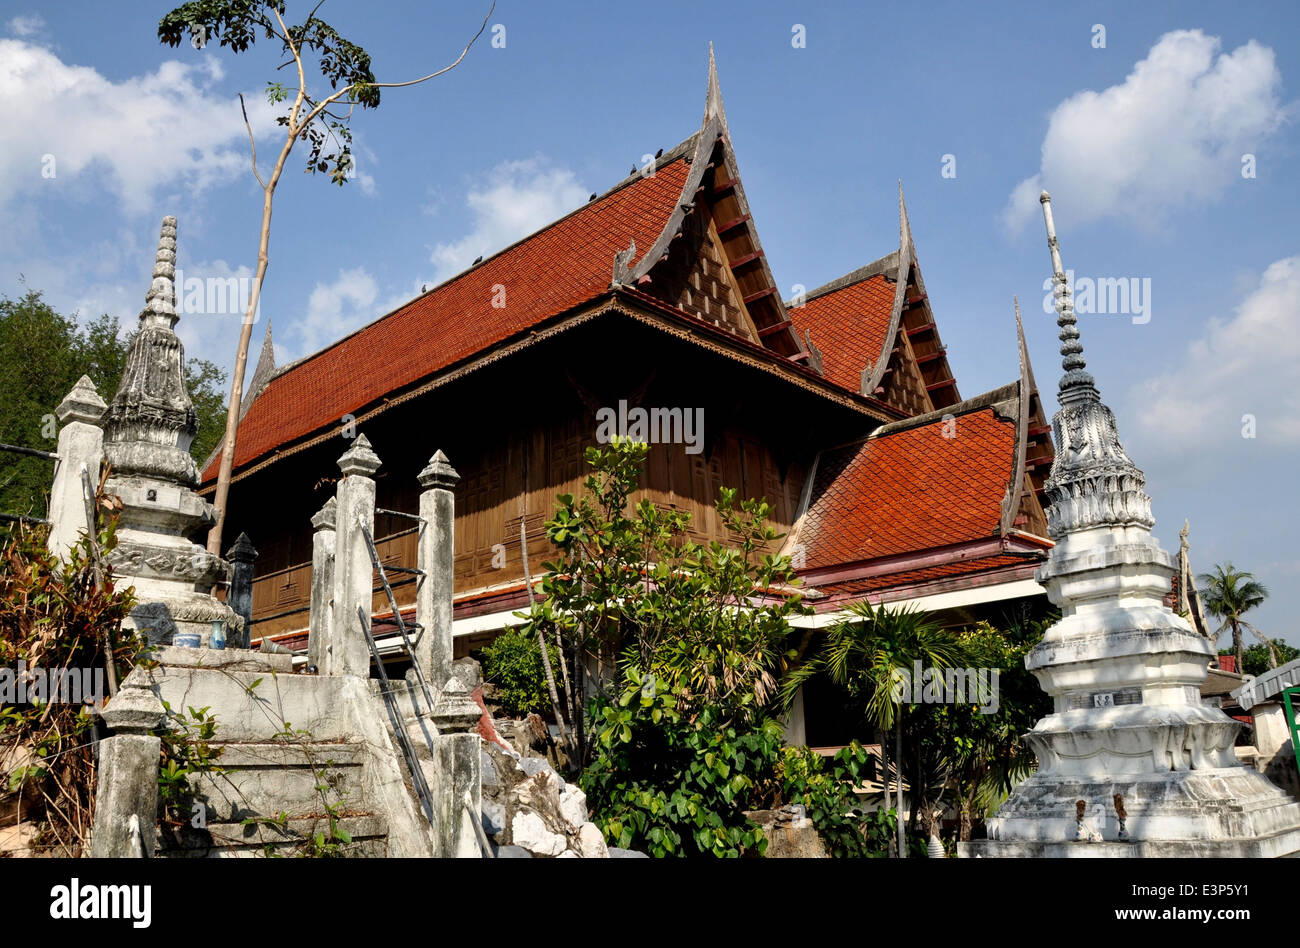 Ayutthaya, Thaialnd: White Chedis stand outside a teak wood monastic house with high gables and chofahs at c. 1503 Wat Na Phrama Stock Photo